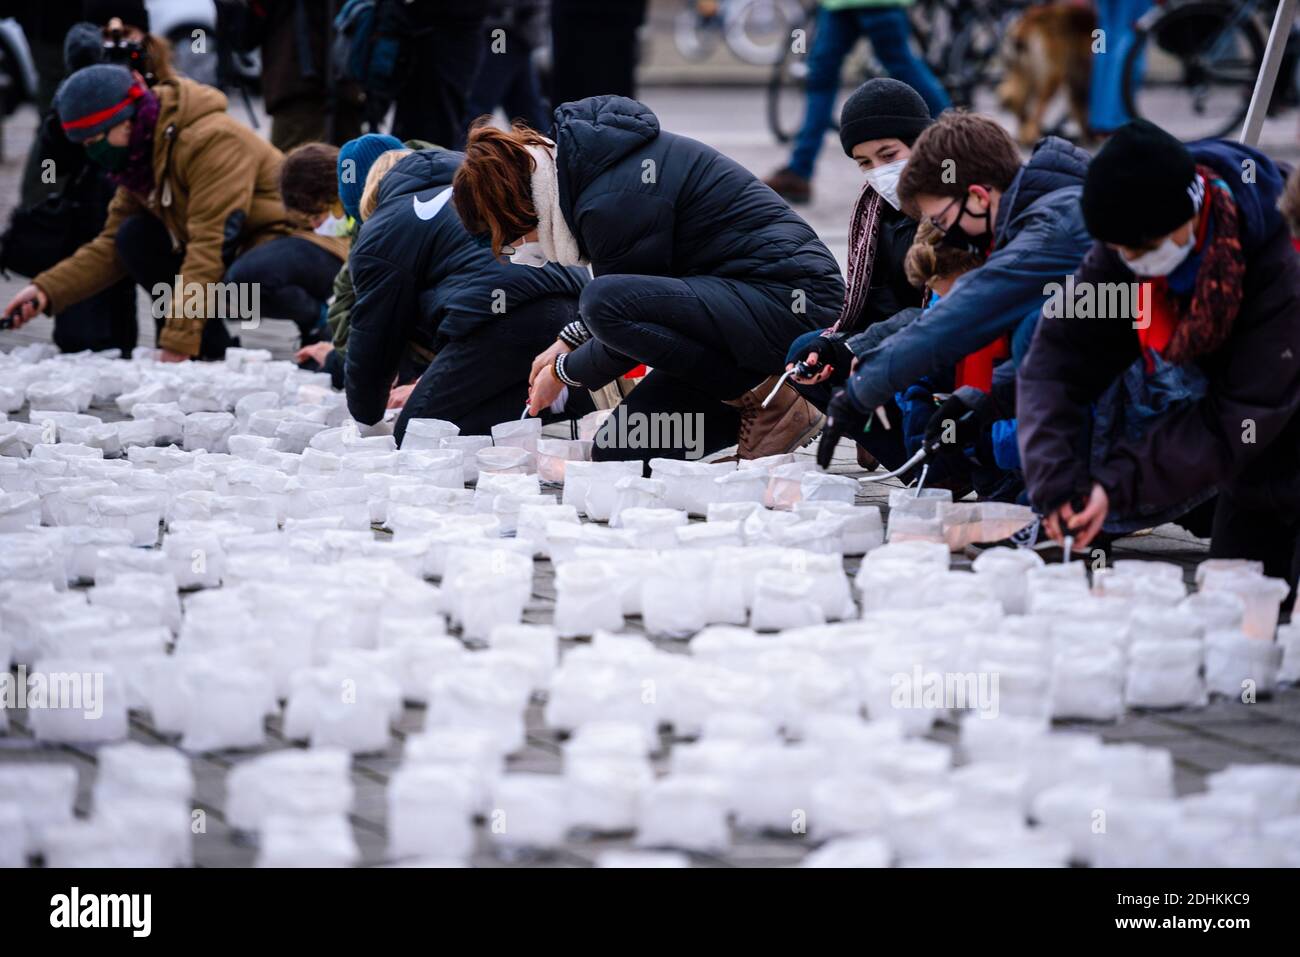 Germany, Berlin, December 11, 2020: Activists light candles as part of an installation, with a lettering '#FightFor1Point5 - fight for 1.5 degrees!' made of thousands of candles, the organizers around the climate movement Fridays for Future want to draw the attention of the German government to the compliance with this goal on the occasion of the fifth anniversary of the Paris Climate Agreement on December 12. In order to still reach the 1.5 degree target of the Paris climate agreement, a reduction of CO2 emissions by at least 60 percent is necessary. (Photo by Jan Scheunert/Sipa USA) Stock Photo